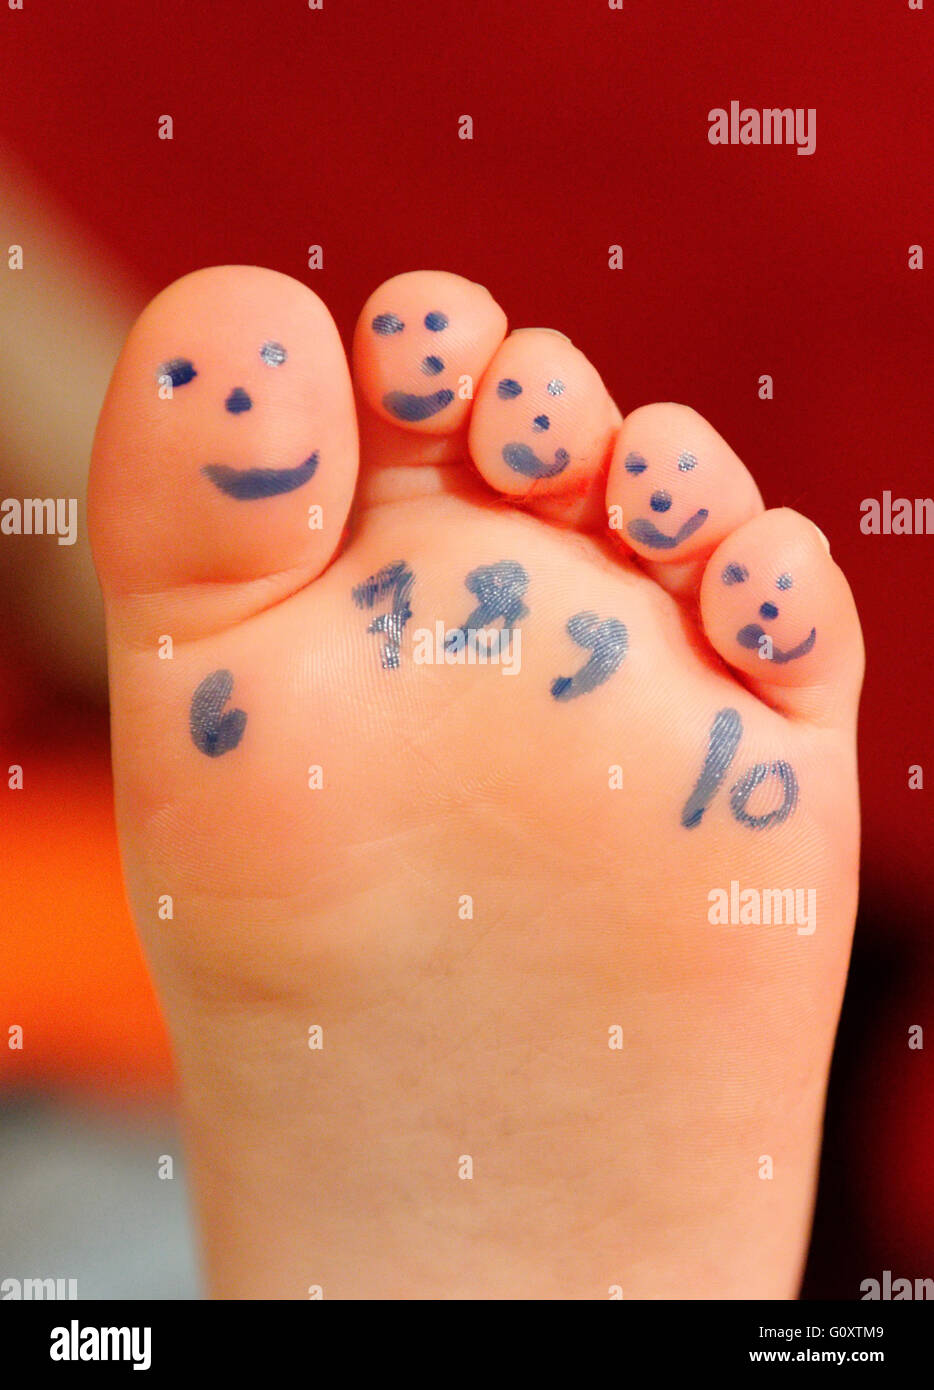 Numbers and faces on the toes of a child Stock Photo